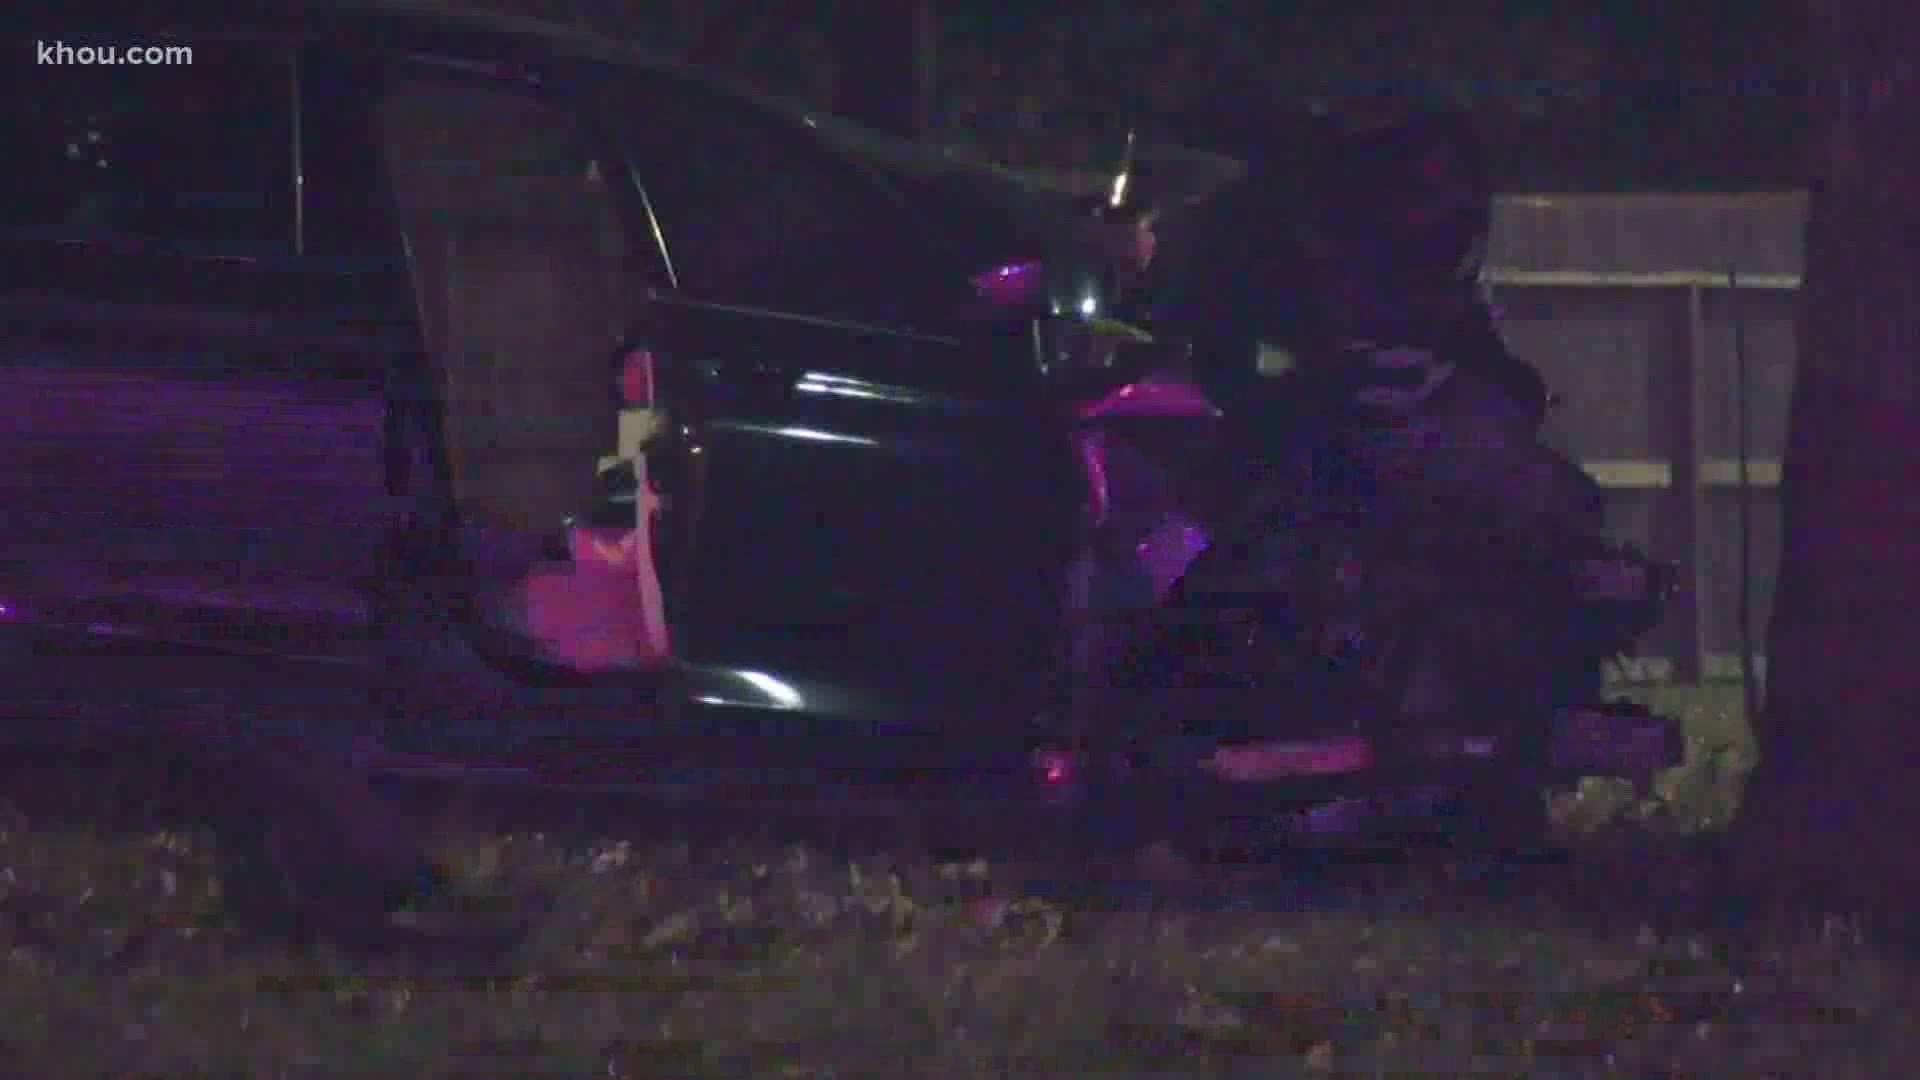 A young man was killed in a crash after investigators said a 15-year-old driver lost control of their vehicle and crashed into a tree in northwest Houston.